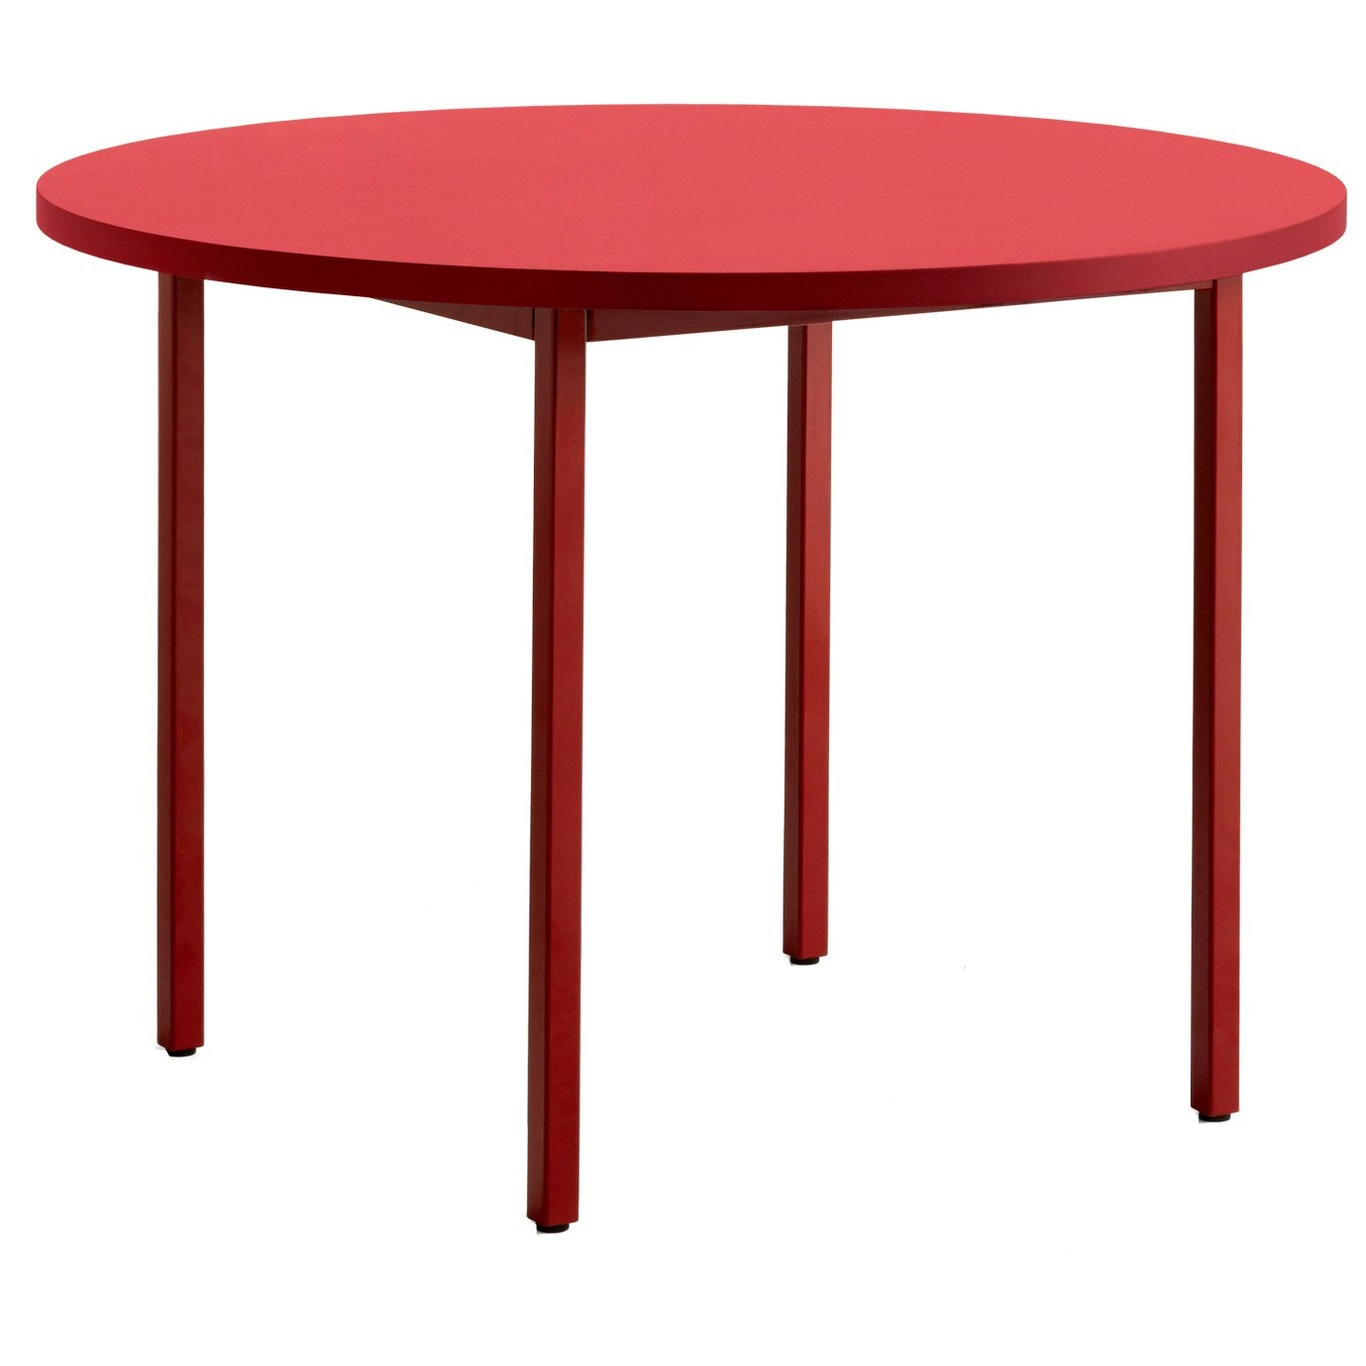 Two-Colour Tafel Ø105 cm, Wijnrood / Rood